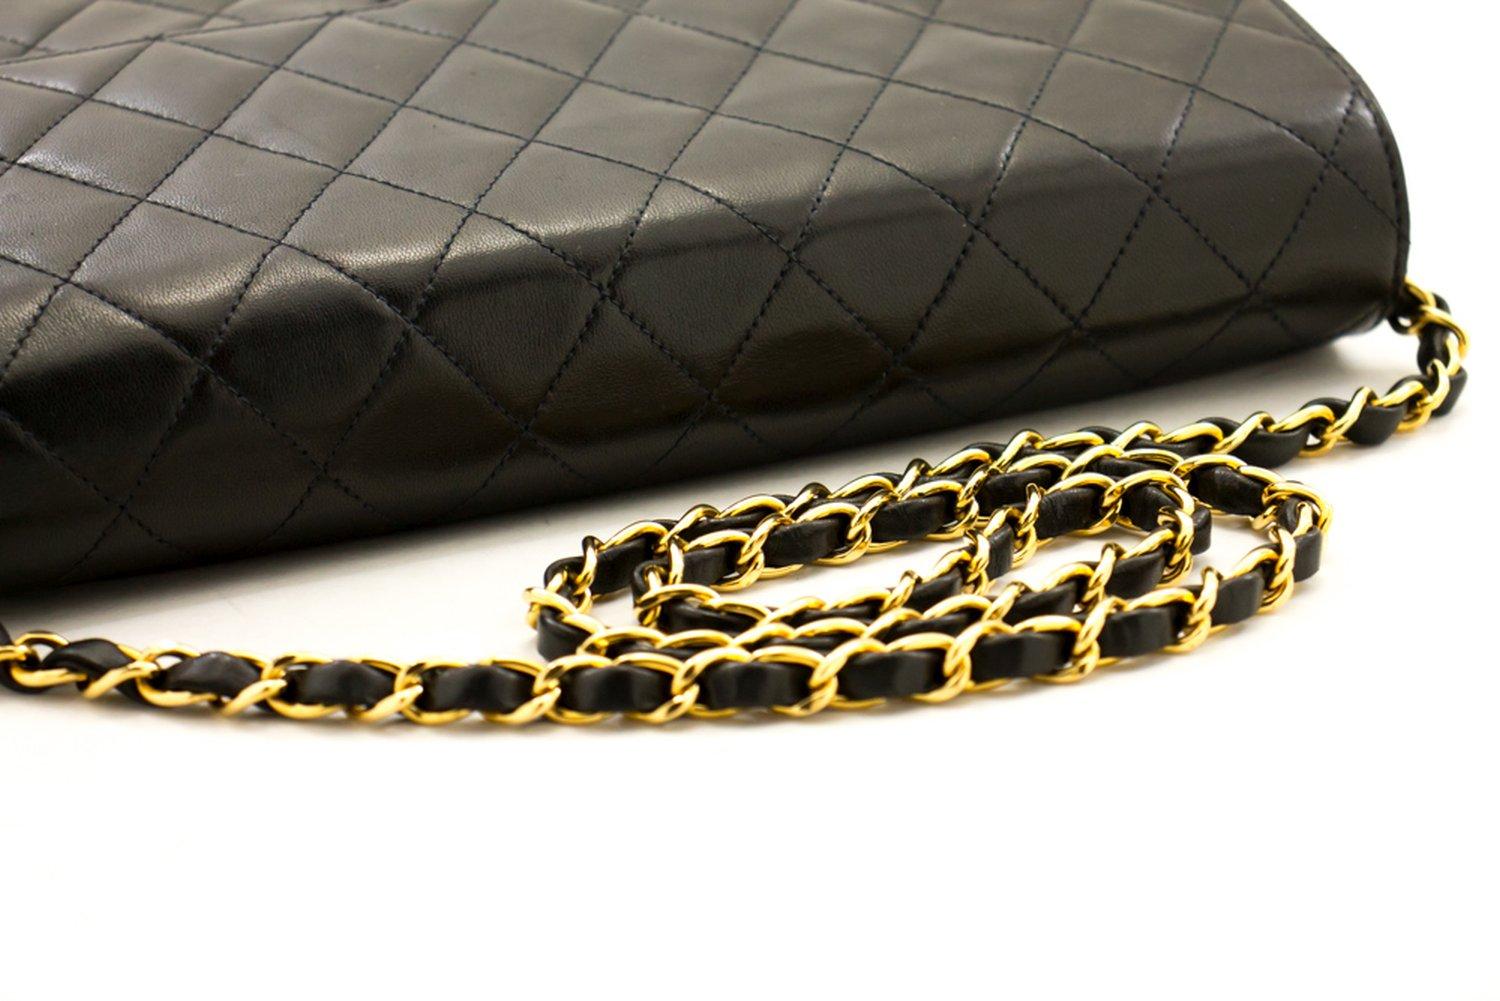 CHANEL Chain Shoulder Bag Black Clutch Flap Quilted Purse Lambskin 7